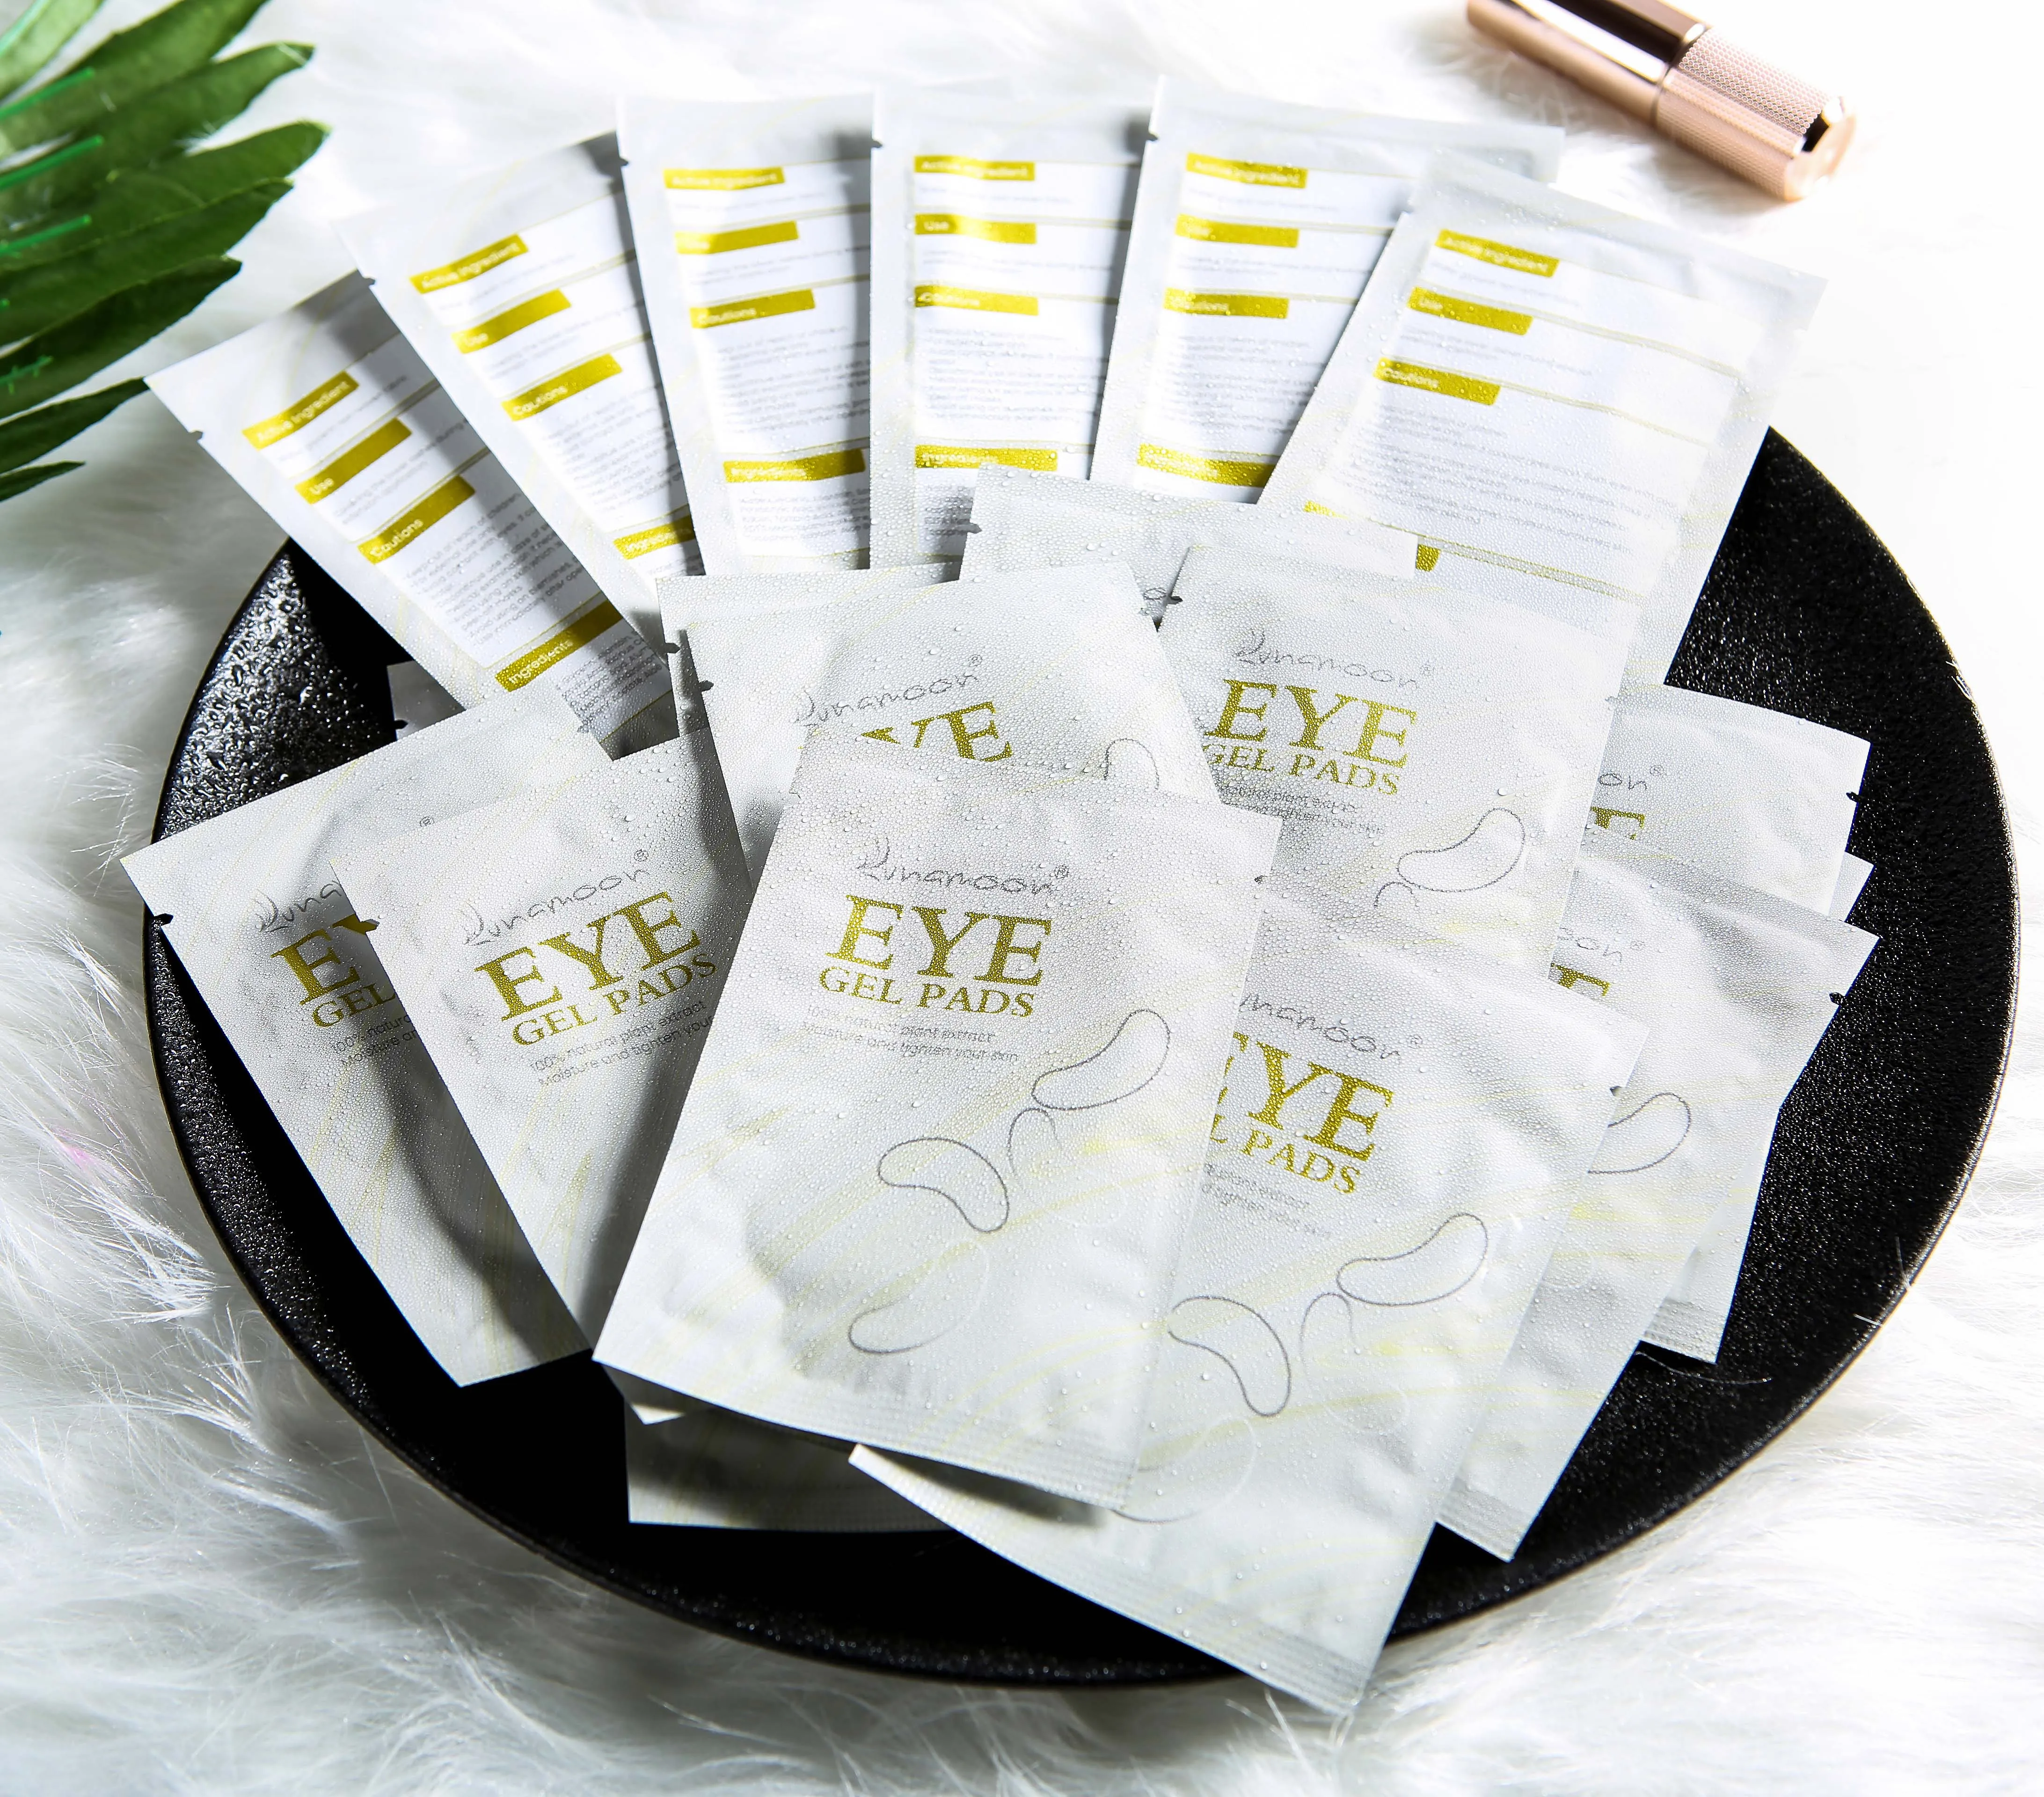 10050 pairs Eyelash Extensions Eye Patches Natural material moisturises nourishes the eye area Aloe Vera Extract Pearl Eye